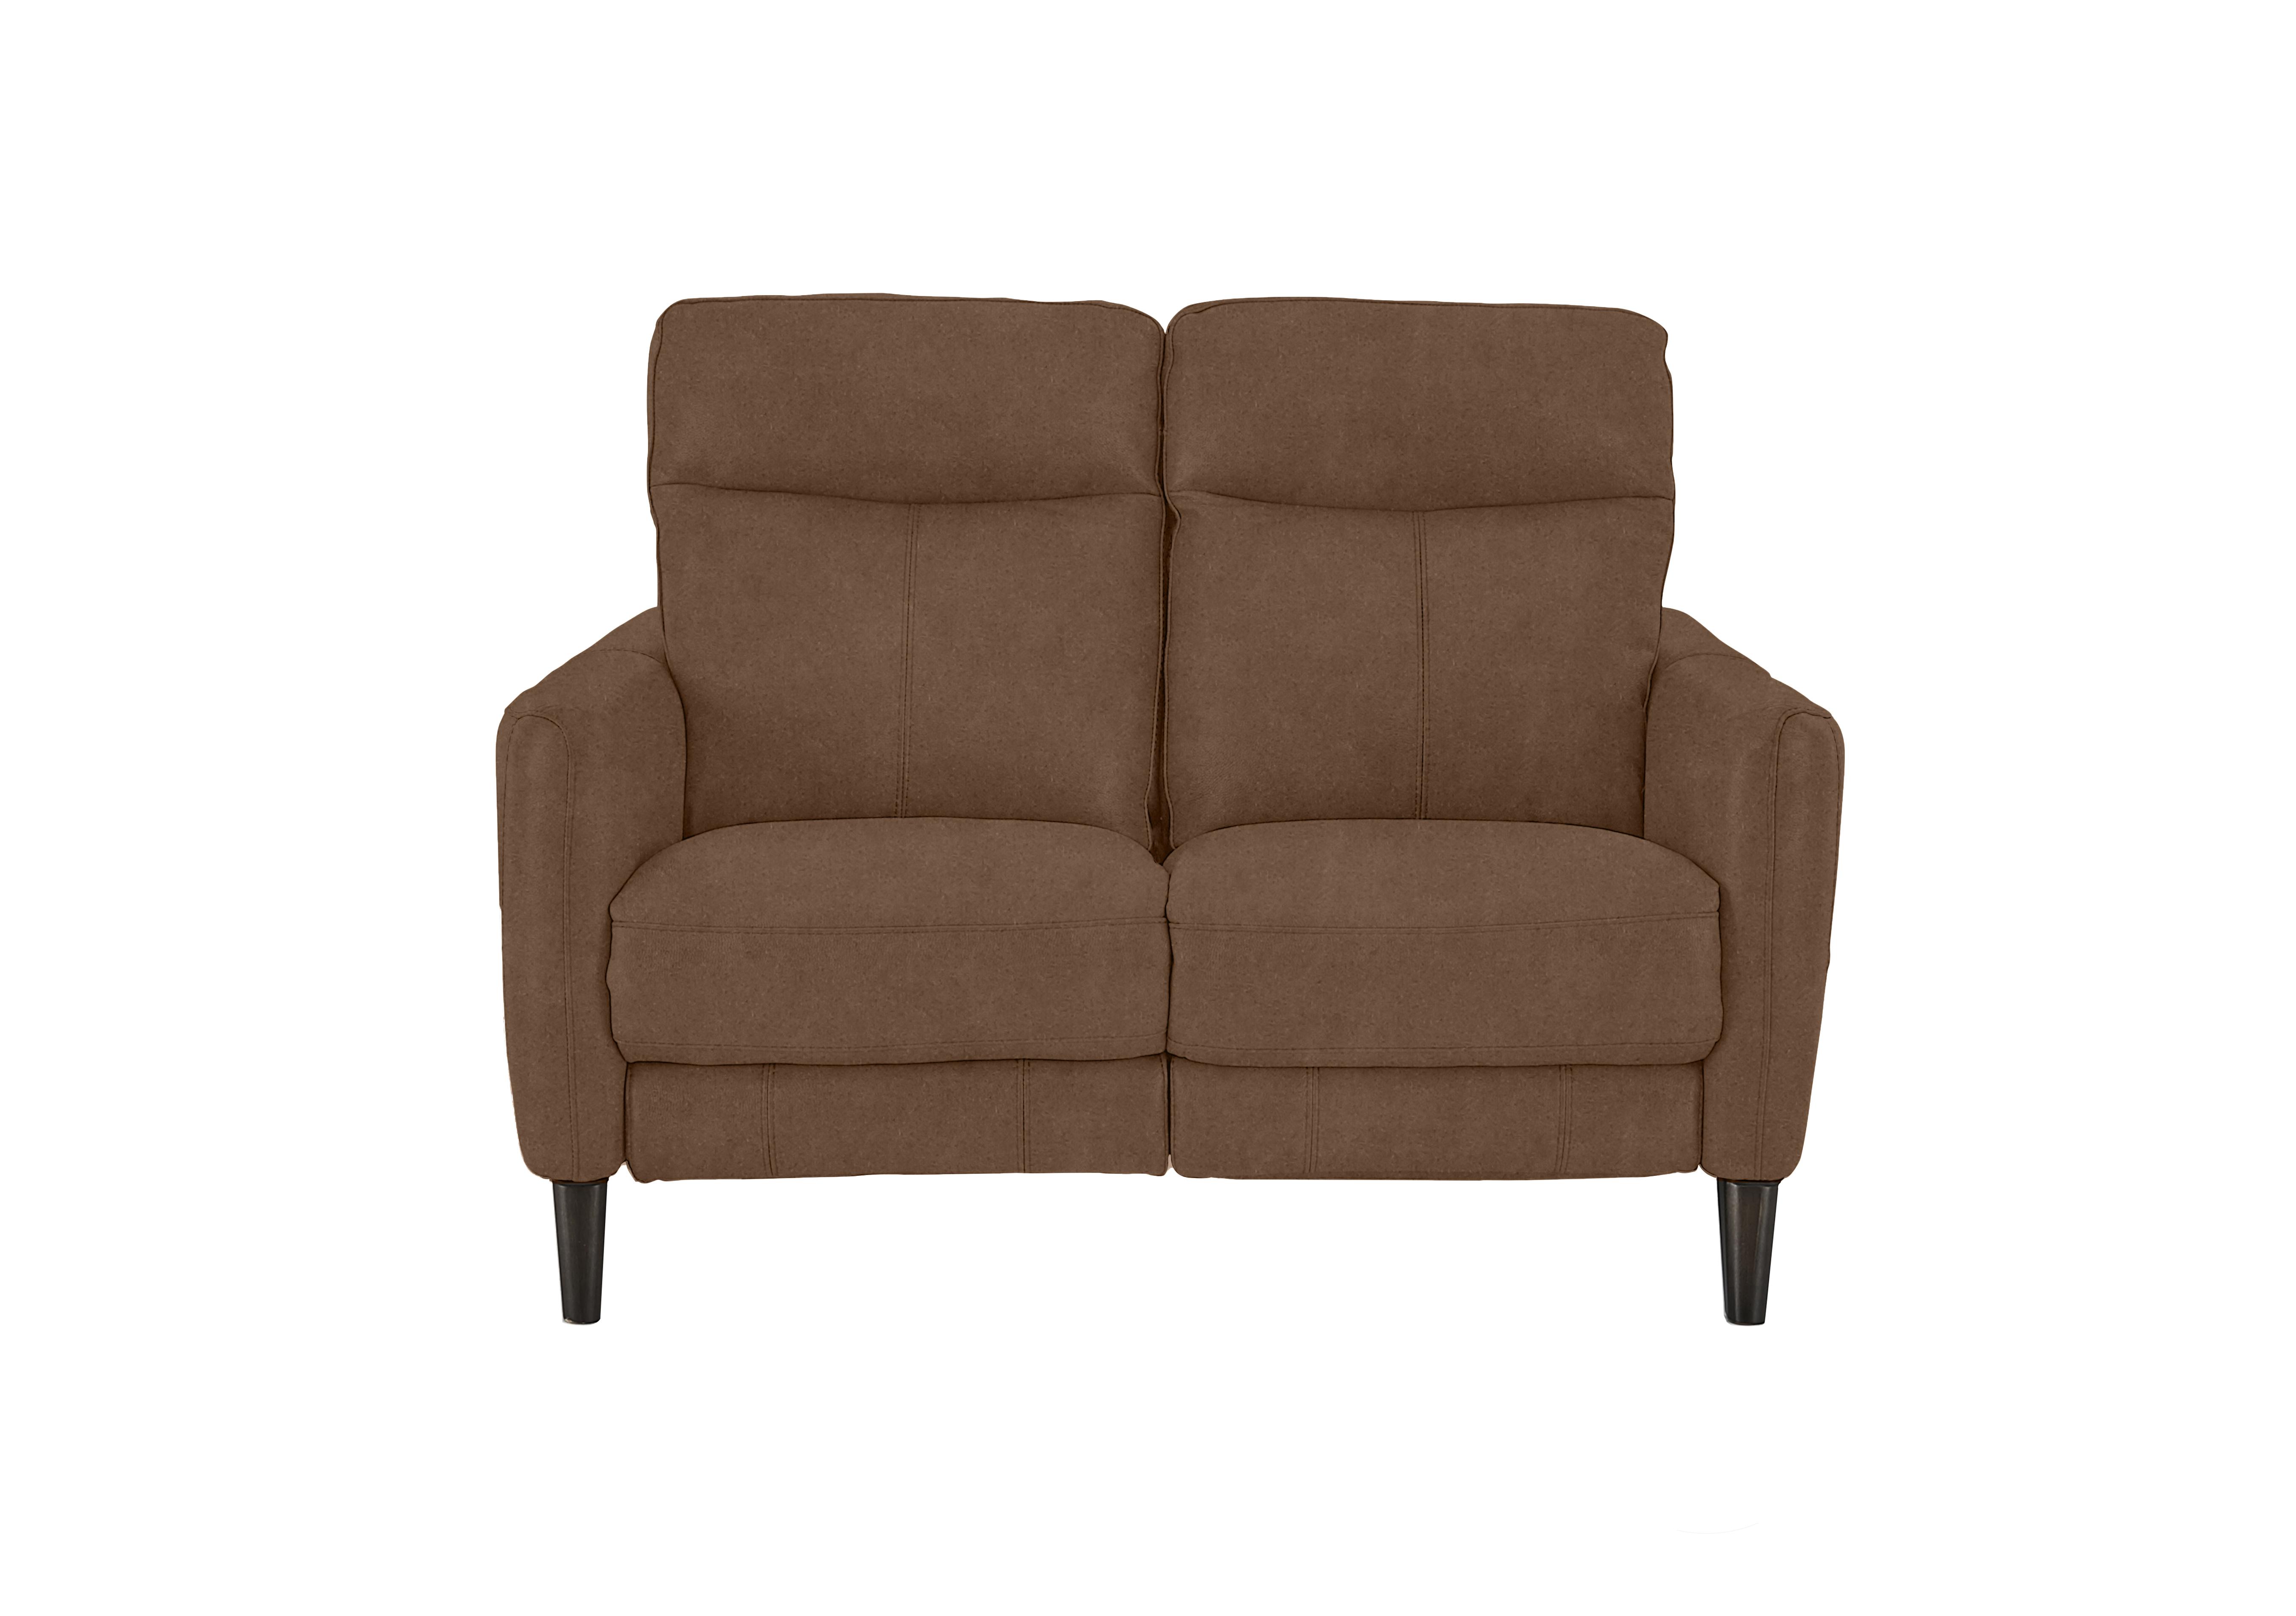 Compact Collection Petit 2 Seater Fabric Sofa in Bfa-Blj-R05 Hazelnut on Furniture Village